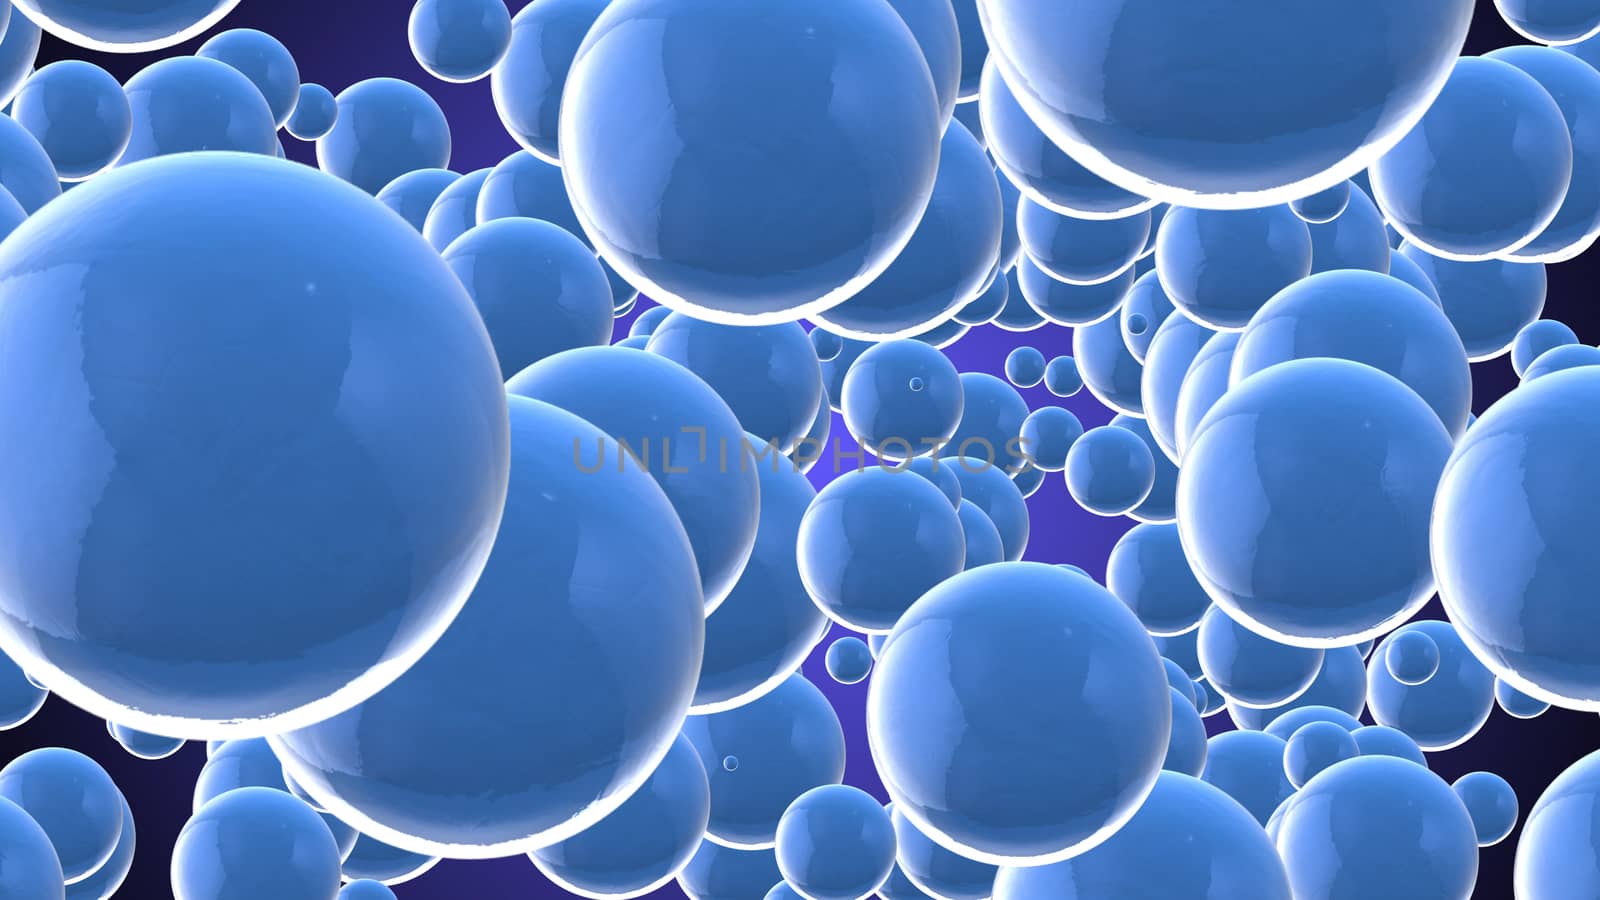 A funny 3d illustration of light blue stars and balls with numerous shimmering tints and slightly seen reflections whirling in the light violet background. They create a hilarious mood.